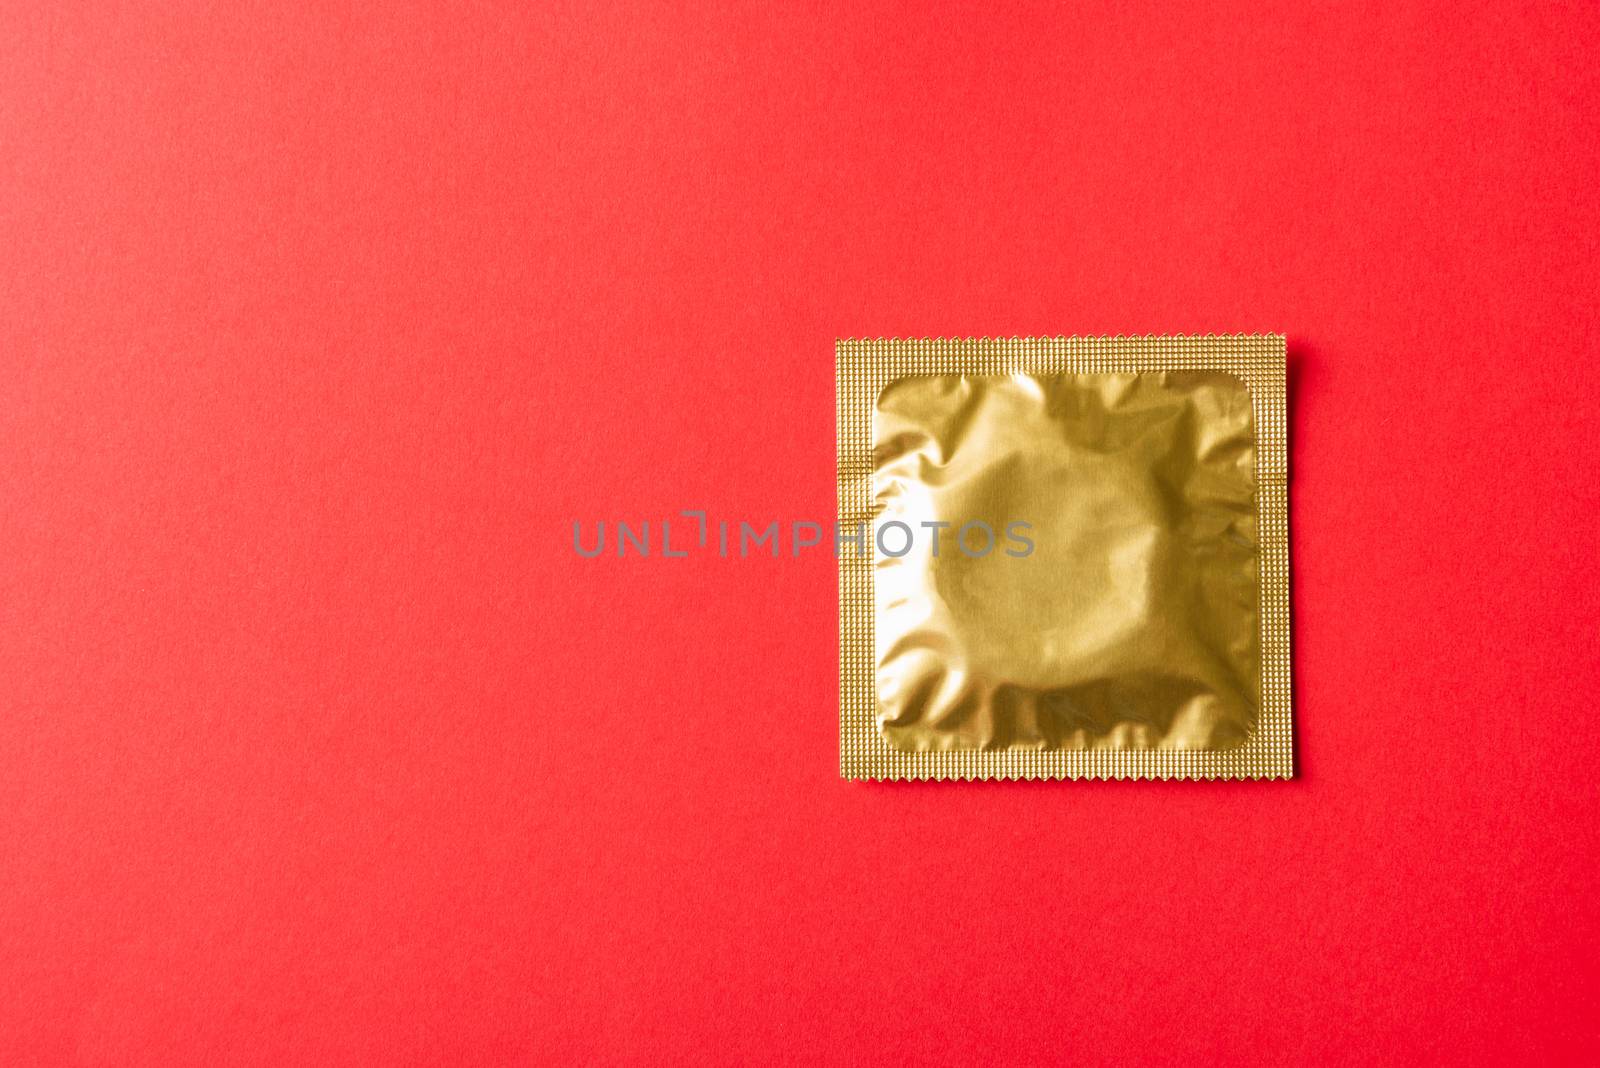 World sexual health or Aids day, Top view flat lay condom in wrapper pack, studio shot isolated on a red background, Safe sex and reproductive health concept